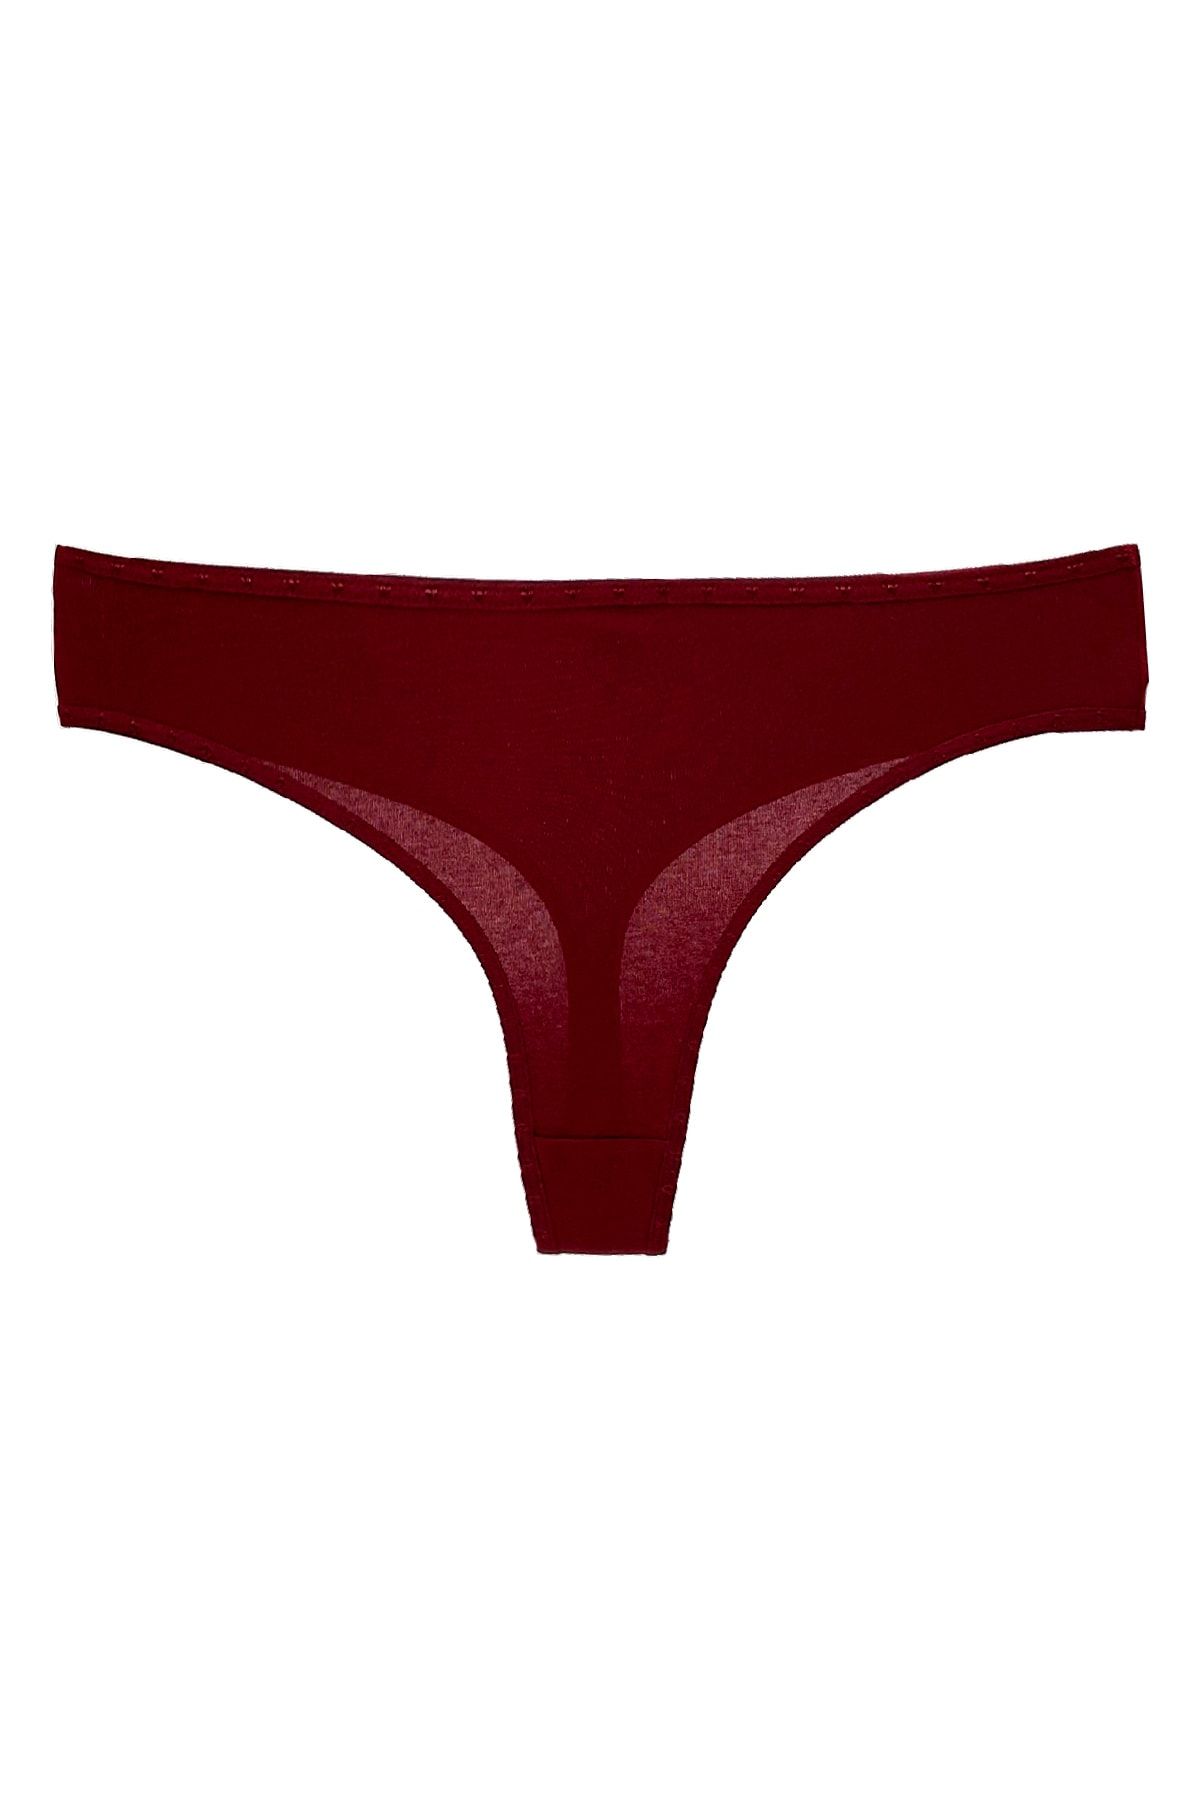 HNX Burgundy Cotton Solid Color Heart Elastic Basic Women's Thong